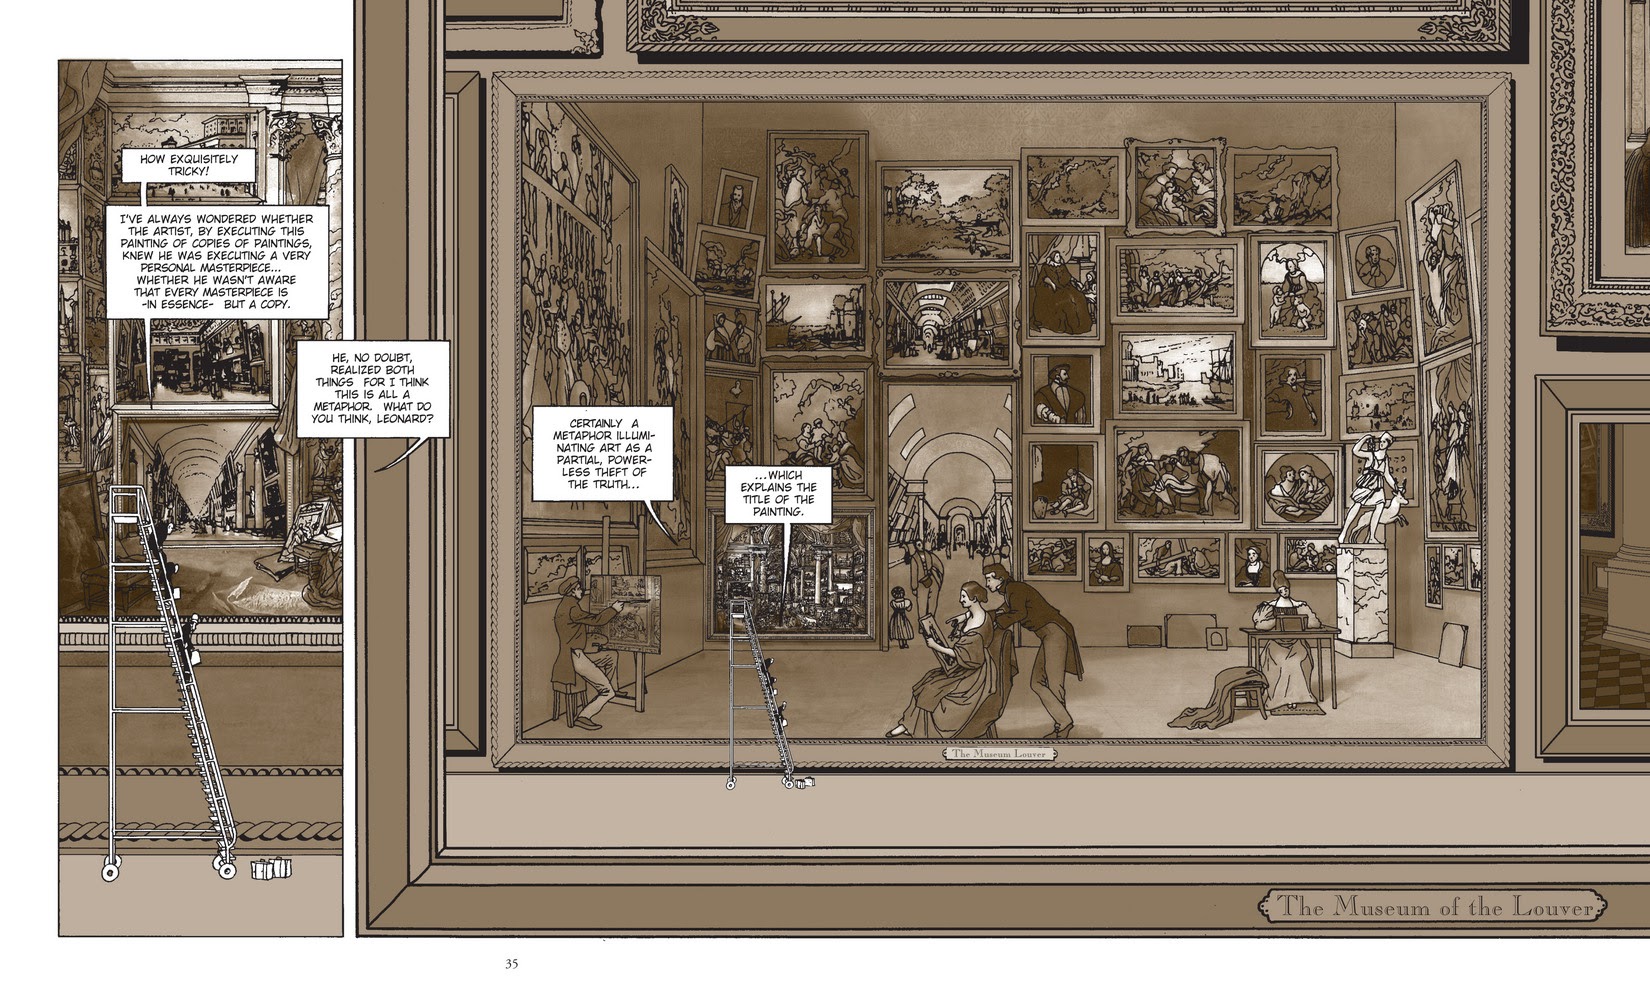 Read online Museum Vaults: Excerpts from the Journal of an Expert comic -  Issue # Full - 36